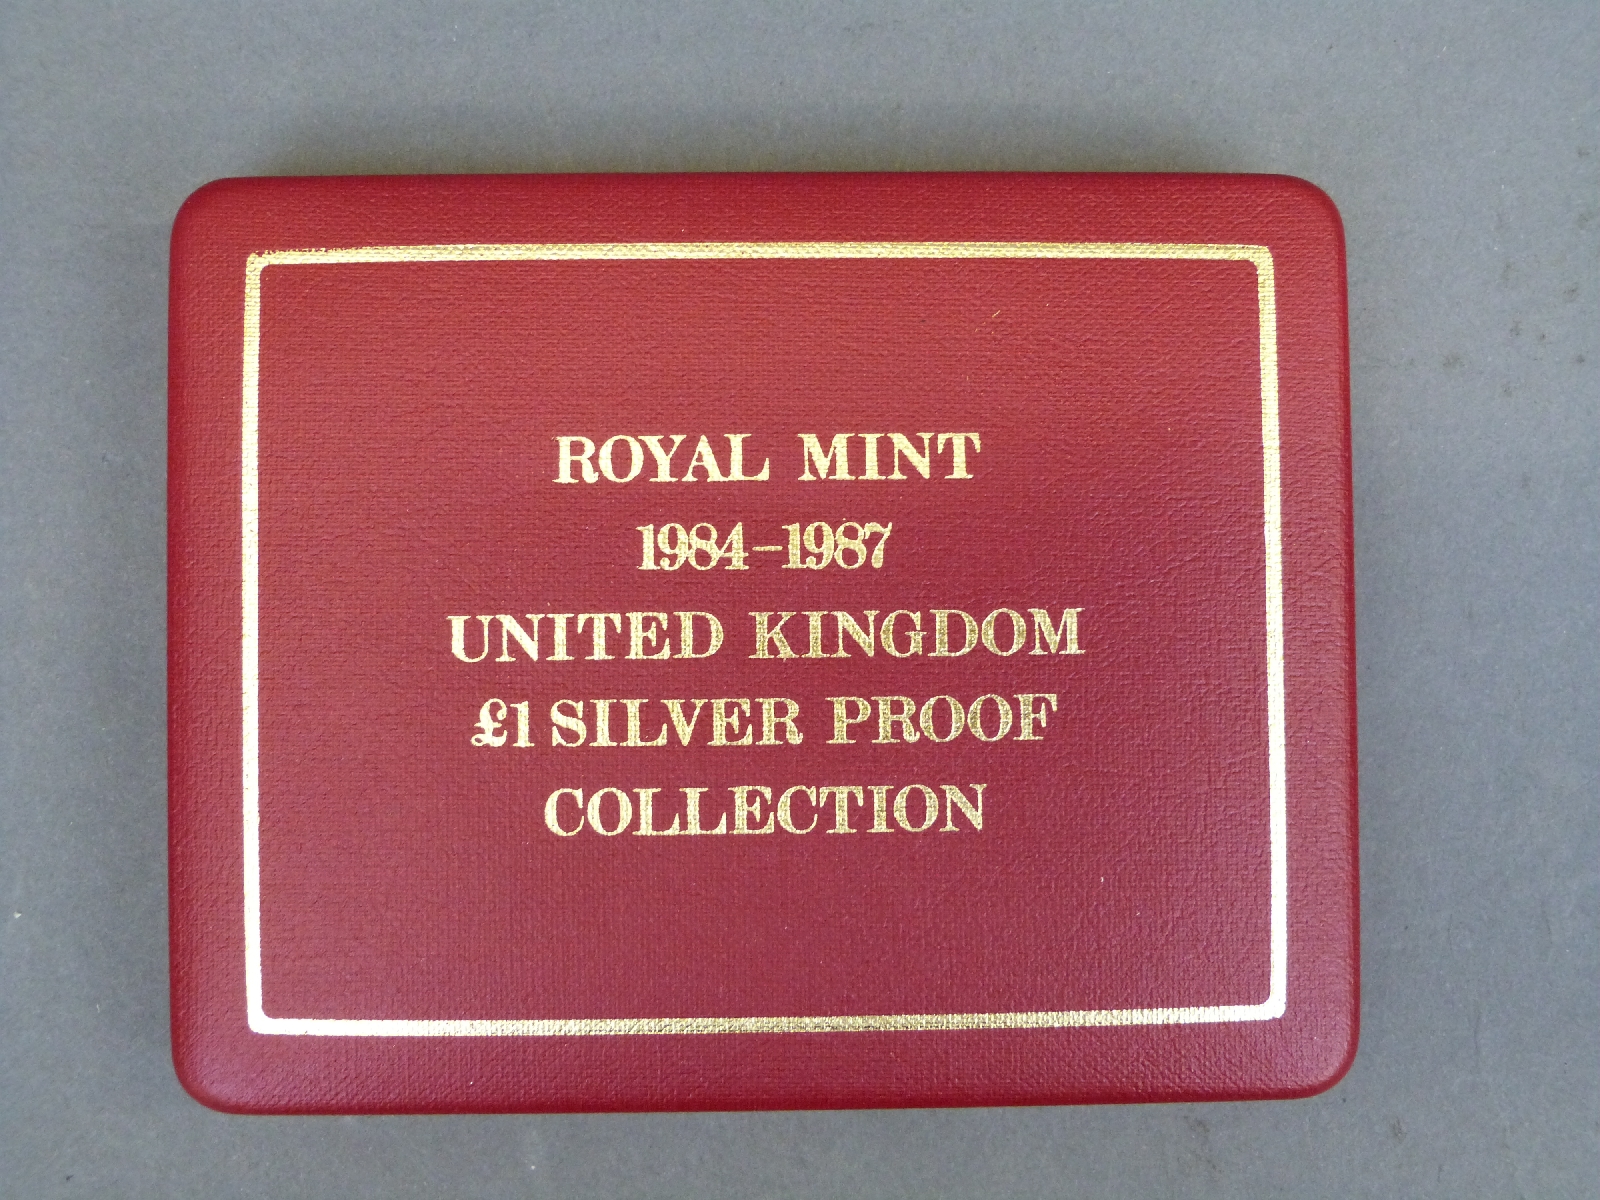 Royal Mint 1984-1987 UK £1 silver proof coin set, sealed and cased, - Image 2 of 2